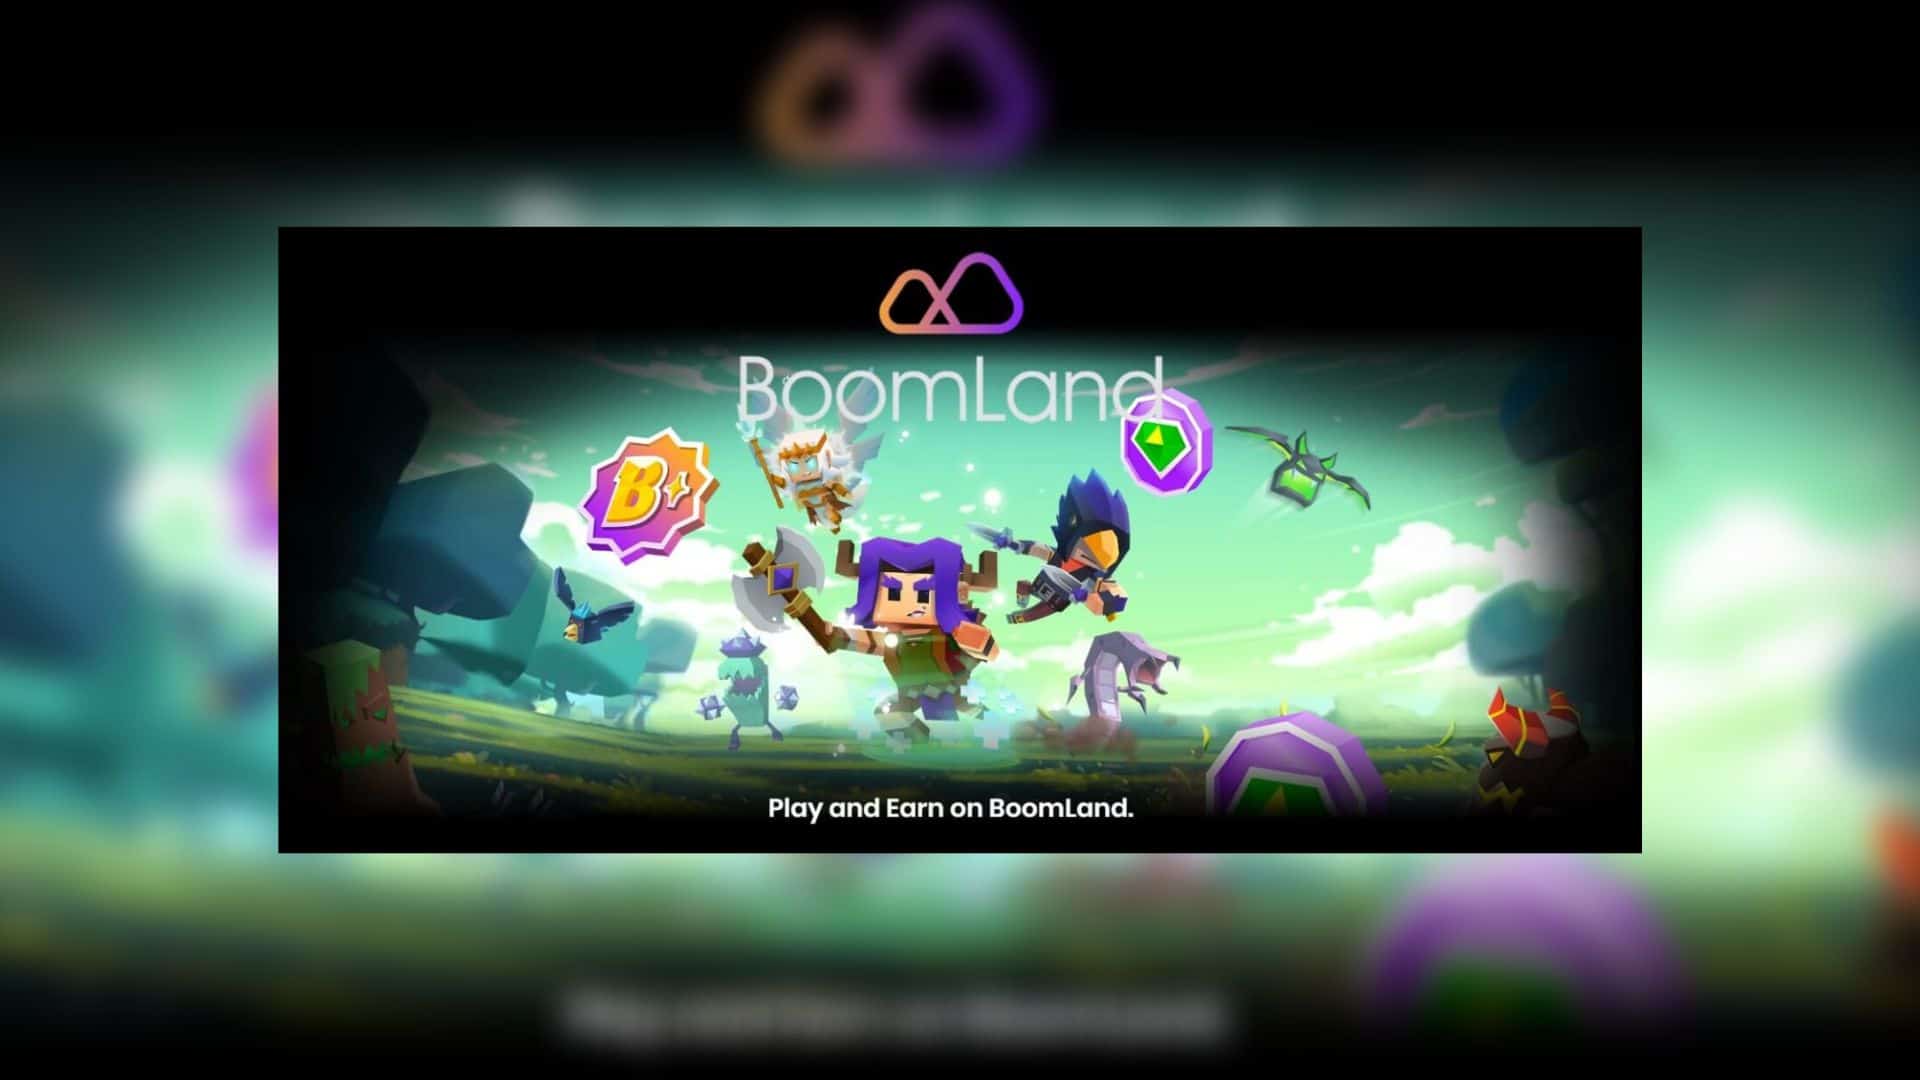 BoomLand – a New Hyper-Casual Platform by Boombit